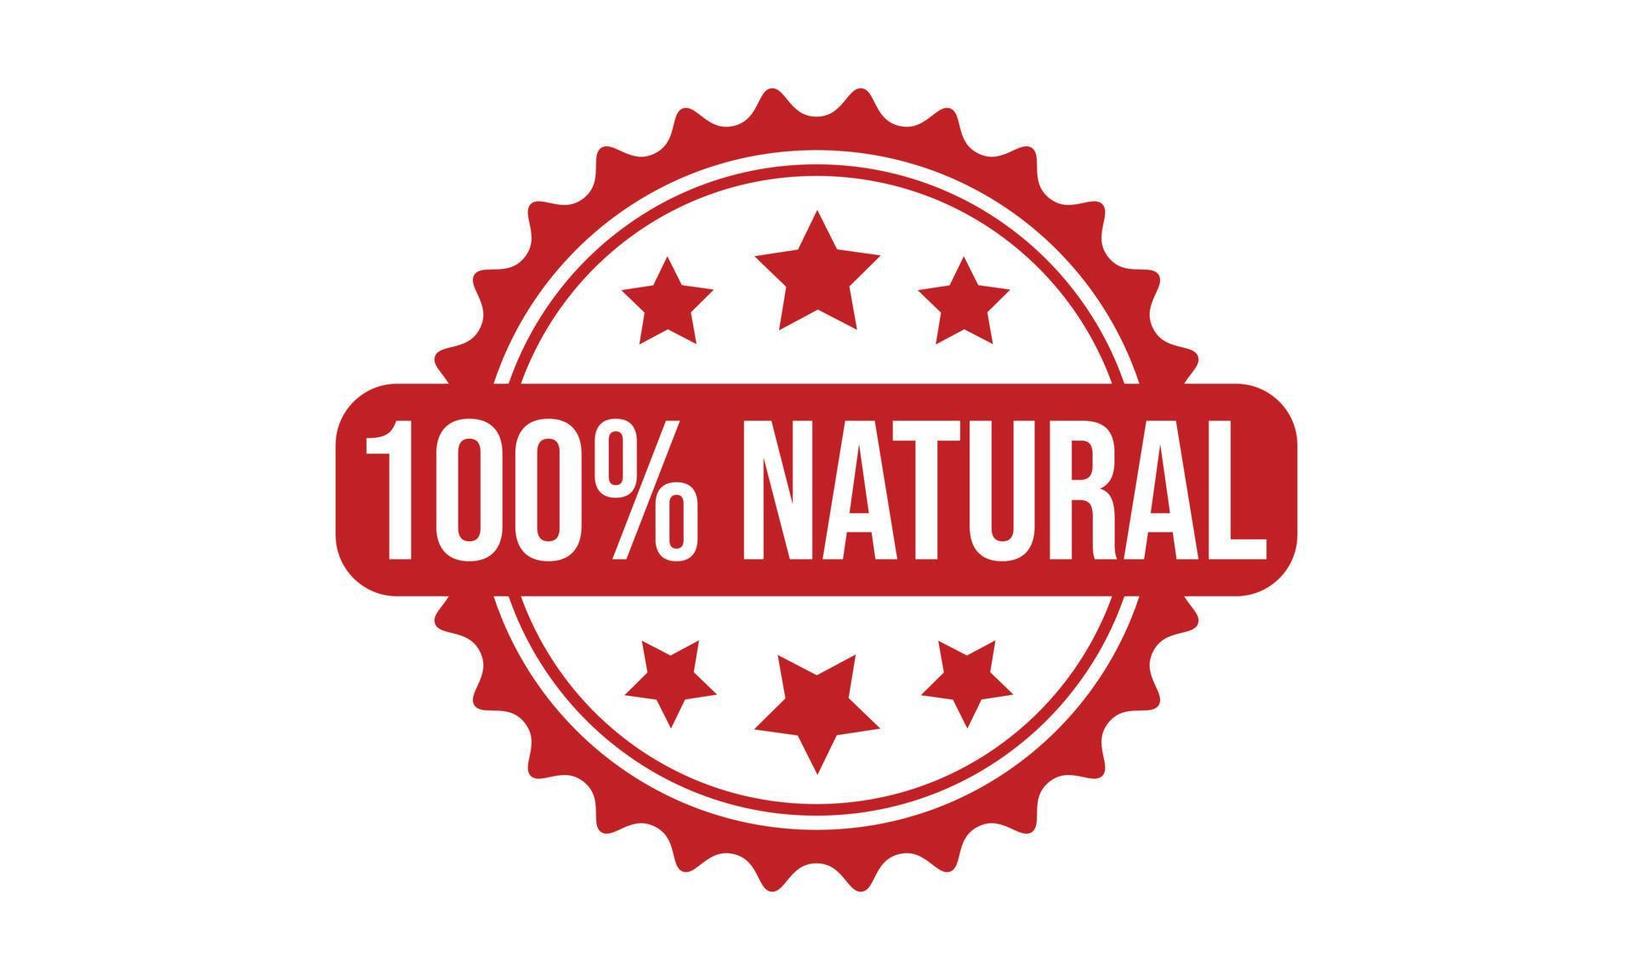 100 Percent Natural Rubber Stamp vector